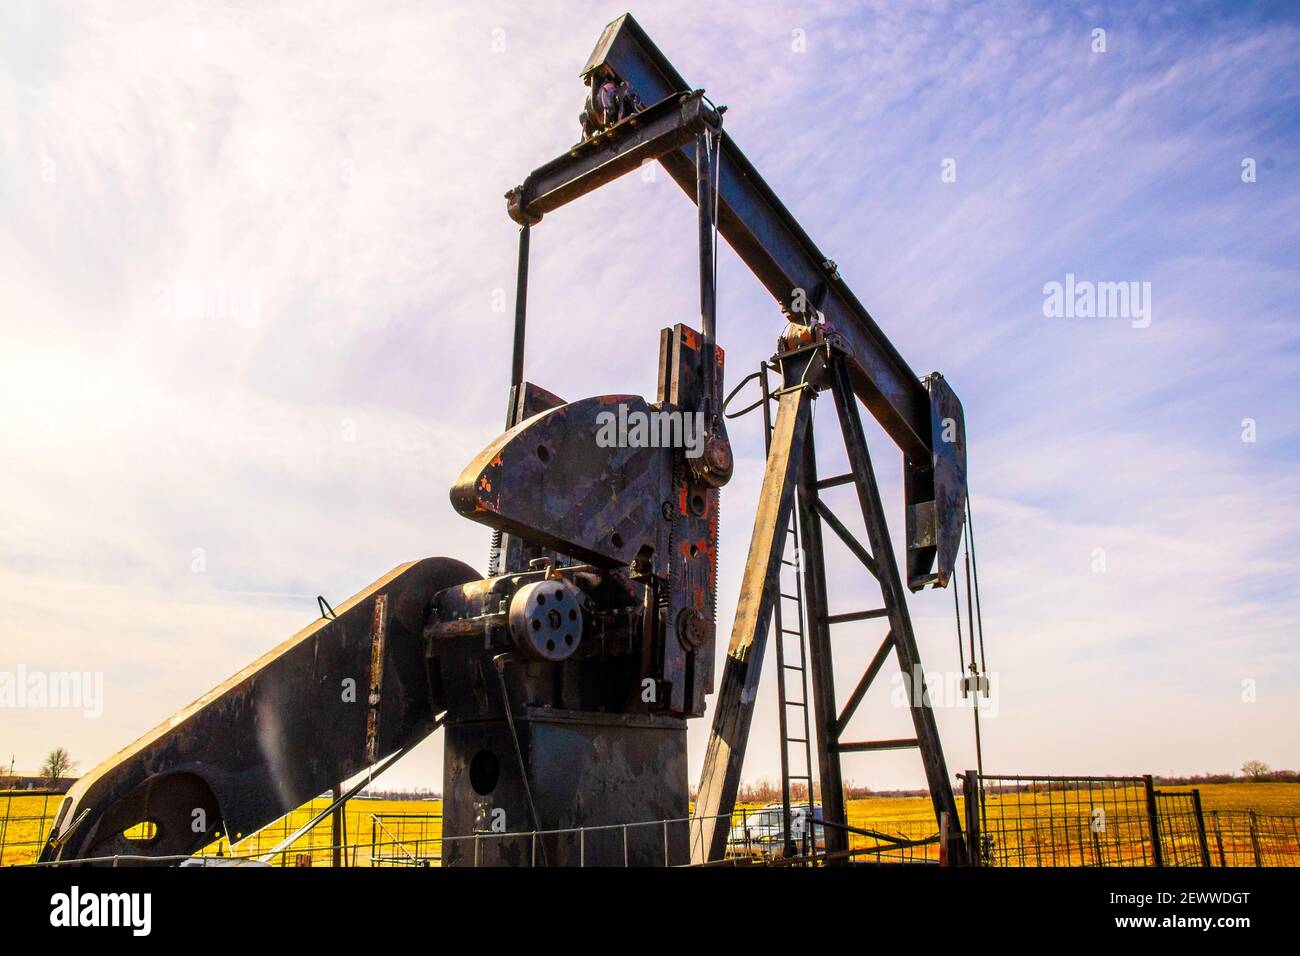 Old rusty oil well pump jack on winter day under strange streaked puple sky in winter pasture with a car parked behind it Stock Photo